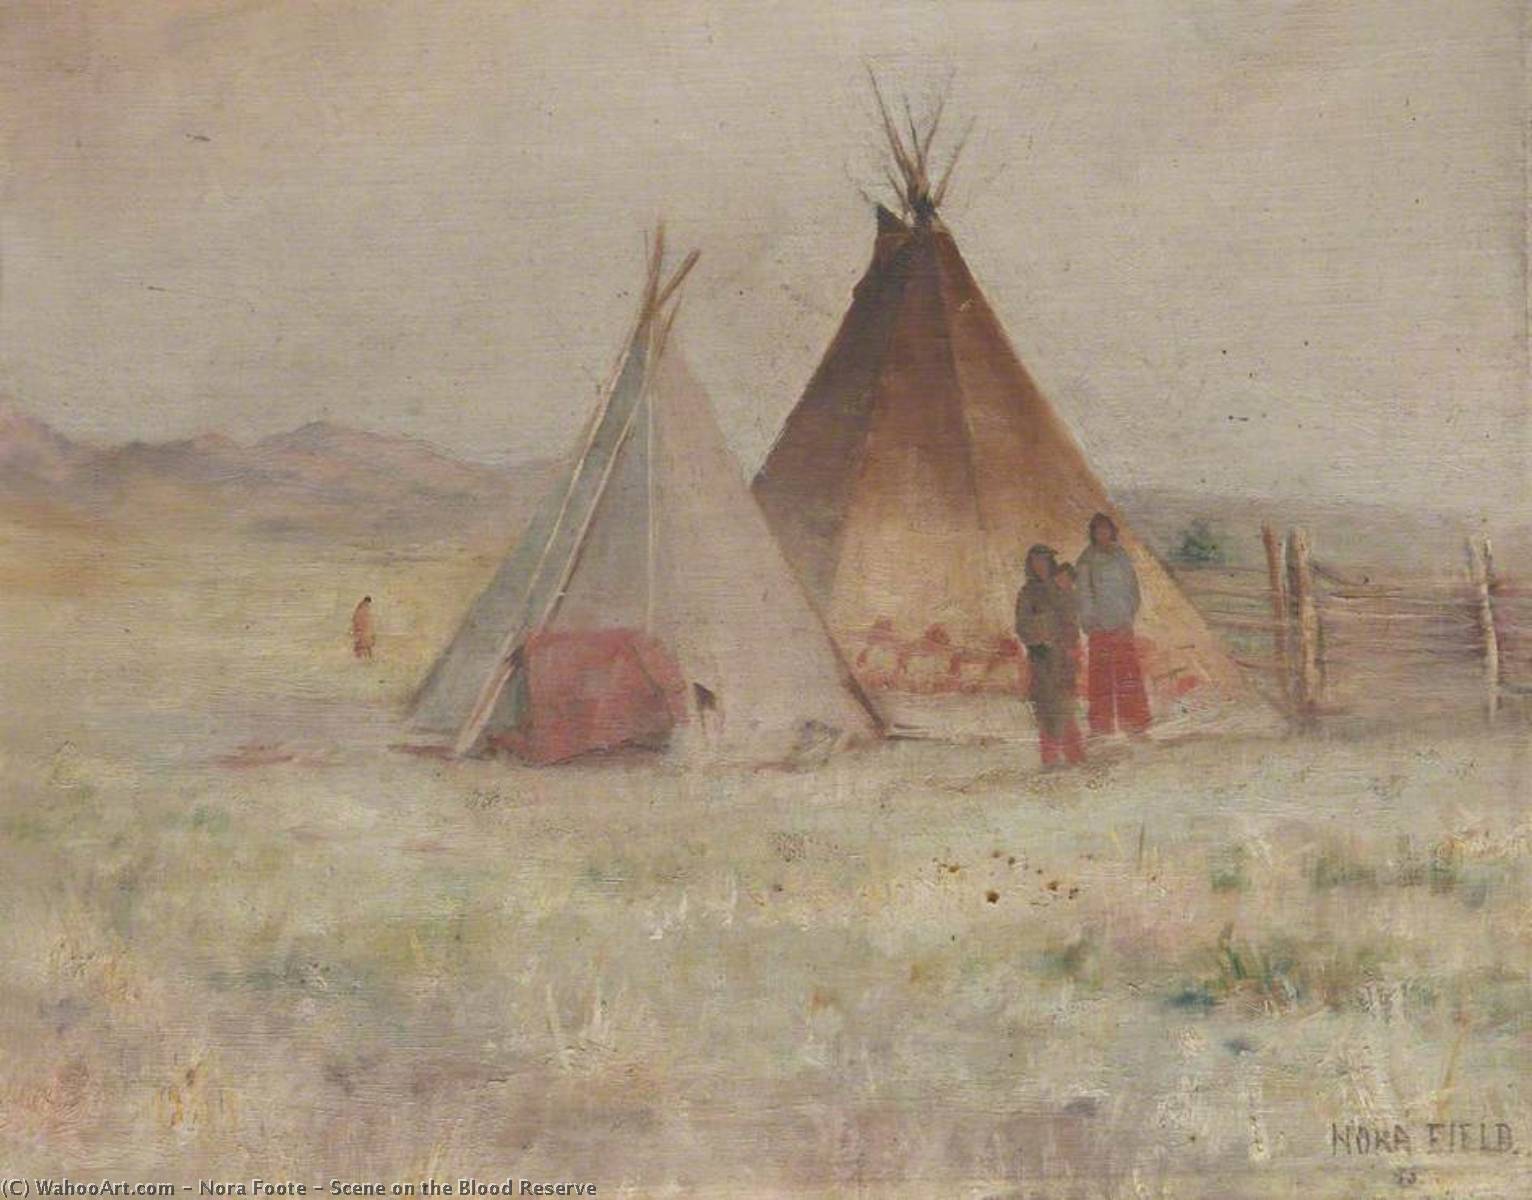 Scene on the Blood Reserve, 1895 by Nora Foote Nora Foote | ArtsDot.com